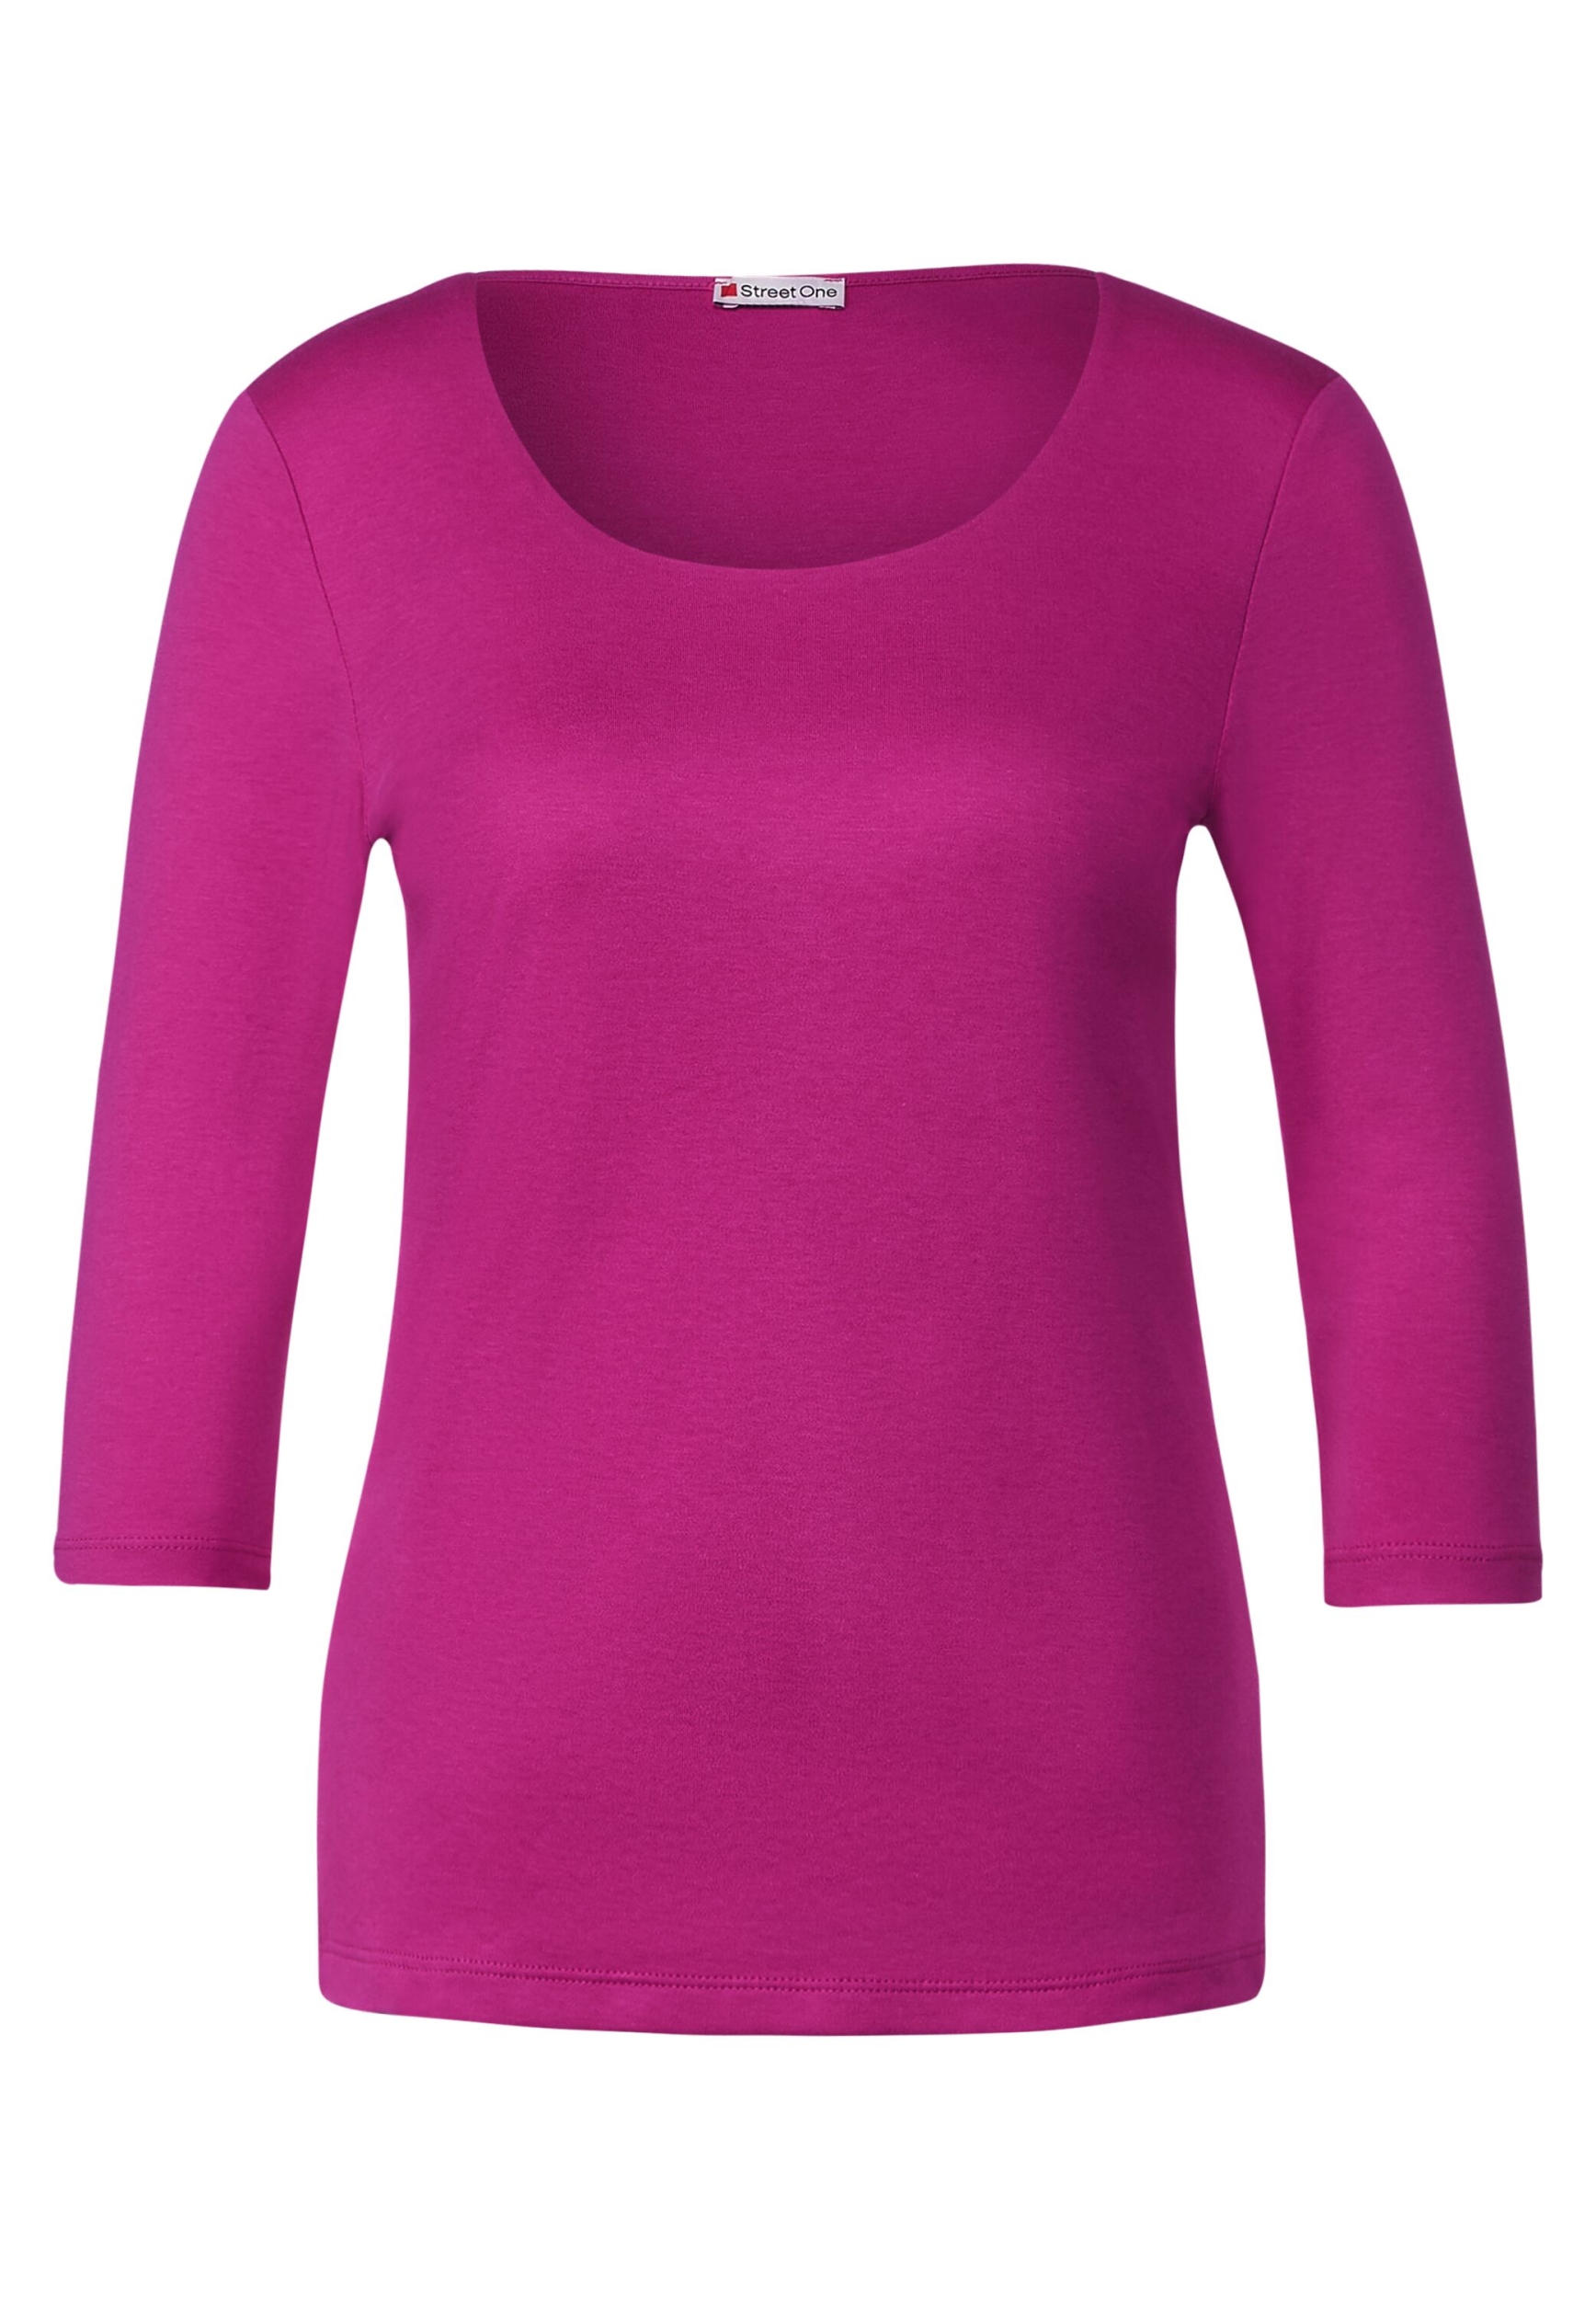 Style QR Pania | 36 | bright cozy pink | A317588-15463-36